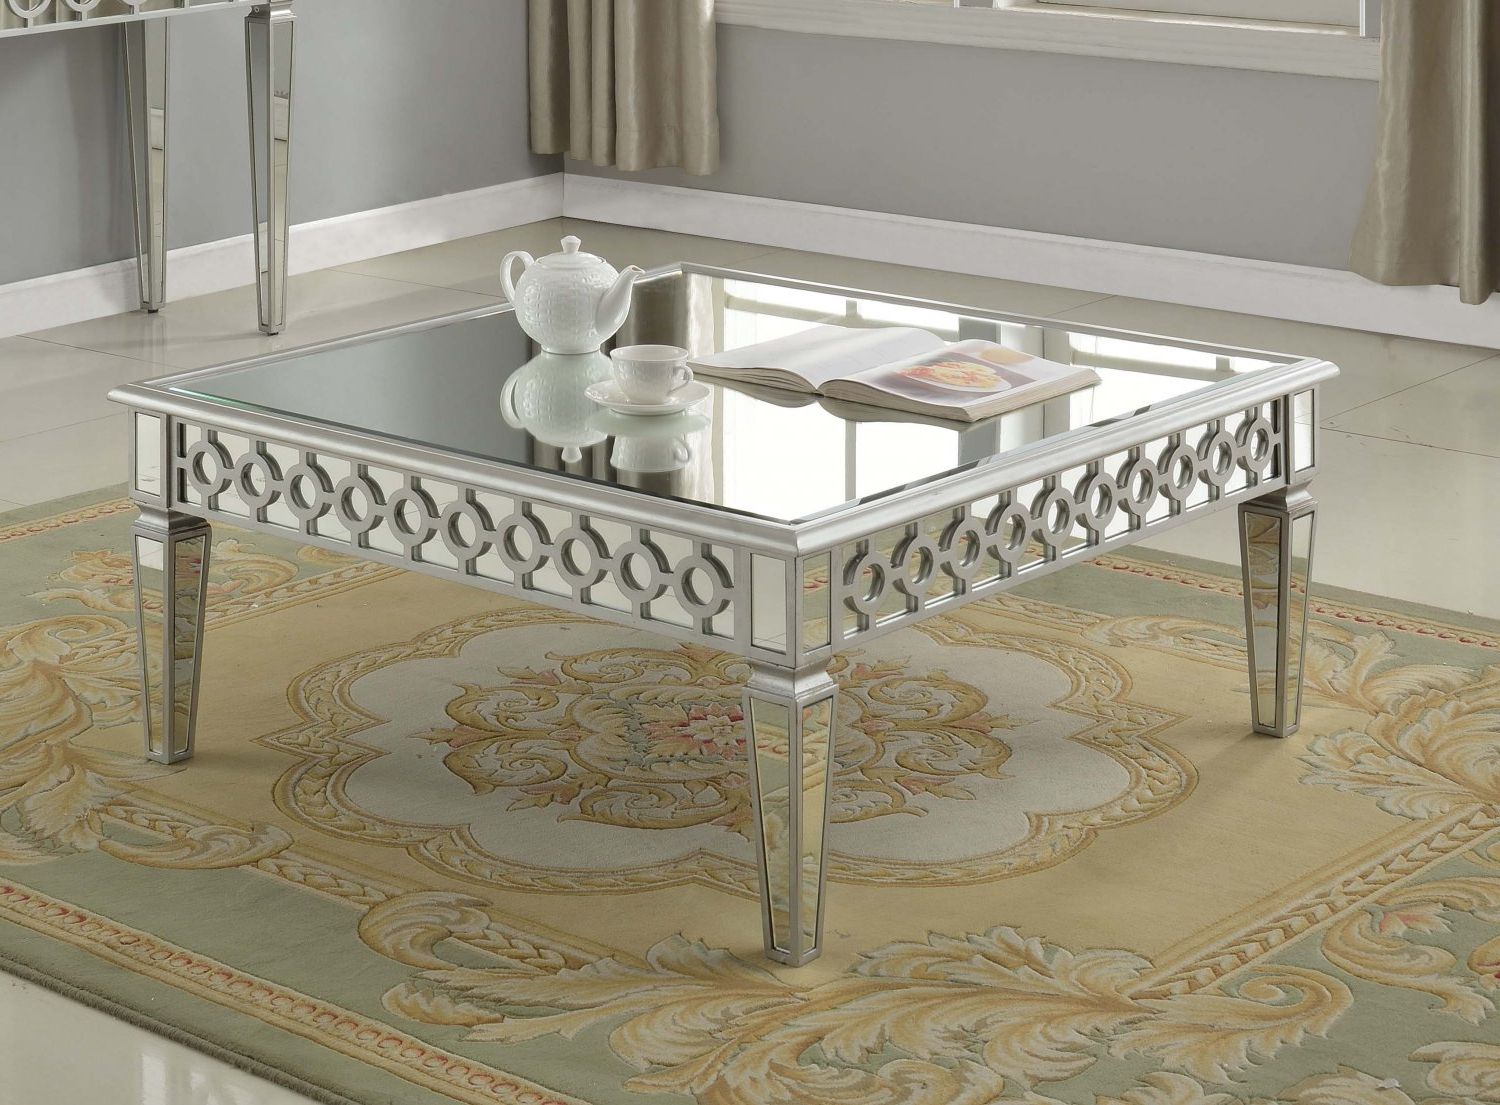 T1840 – Sophie Silver Mirrored Living Room Coffee Tables In Best And Newest Mirrored Modern Coffee Tables (View 4 of 20)